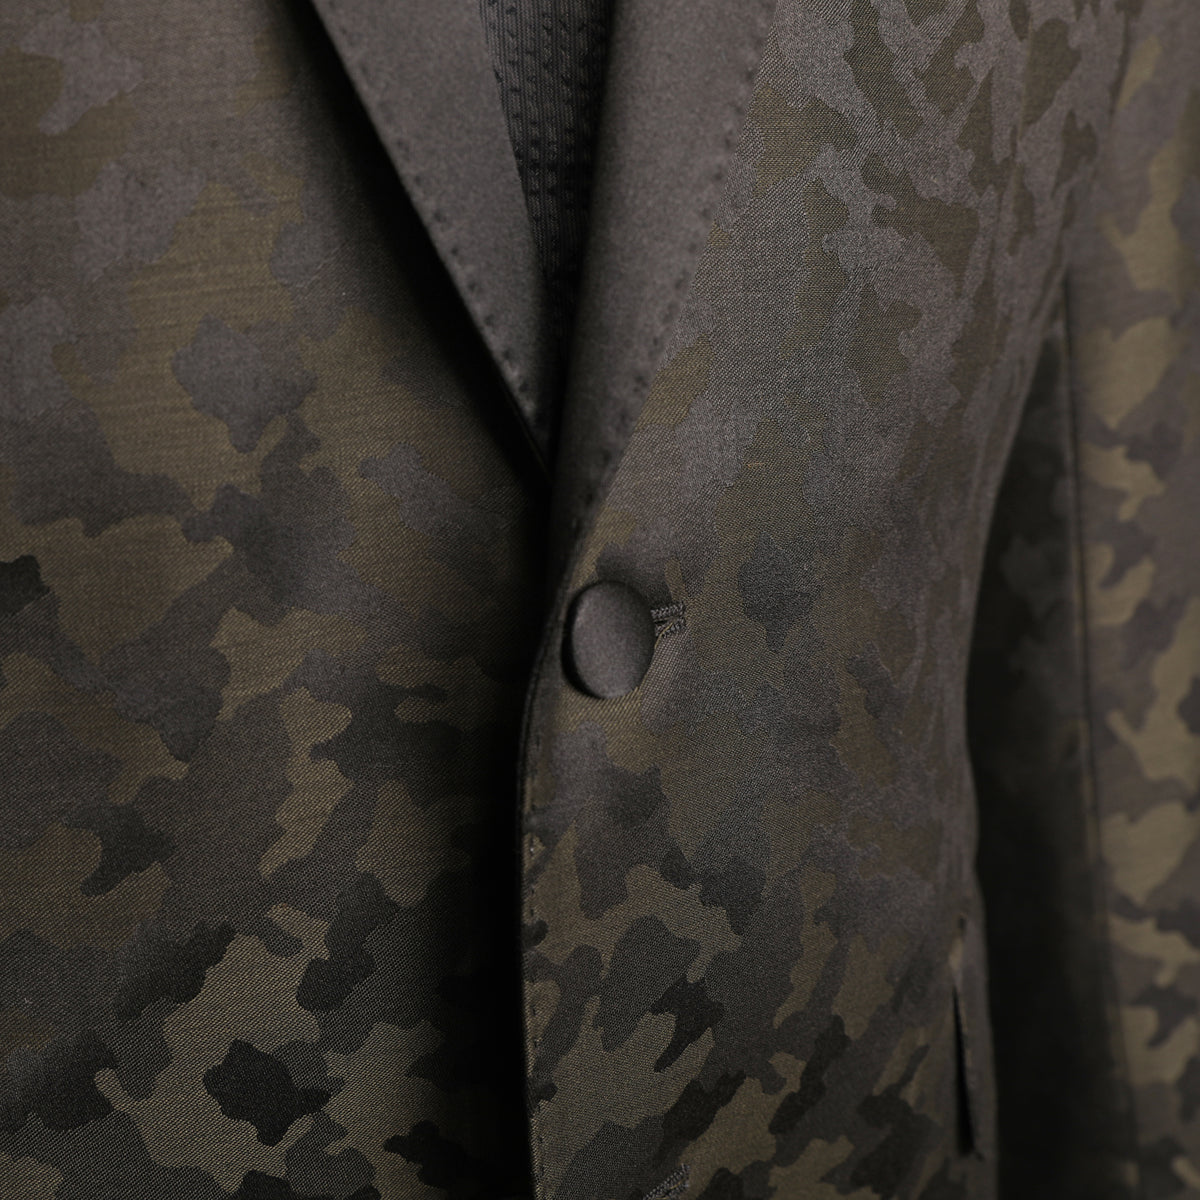 Let the Toulouse black/Olive Camo Dinner Jacket take you to your haute-couture occasions. A satin peak lapel, unique camo pattern, and smooth texture sets you apart from the pack.  Toulouse Modern Fit – Our Modern Fit.  A trimmer fitting jacket with a slightly higher arm hole.   60% Polyester / 20% Wool / 20% Viscose • Natural Shoulder • Two Buttons • Flap Pockets • 3/4 Lined for Maximum Cool • Side Vents • Satin Peak Lapel • Dry Clean • Made in USA